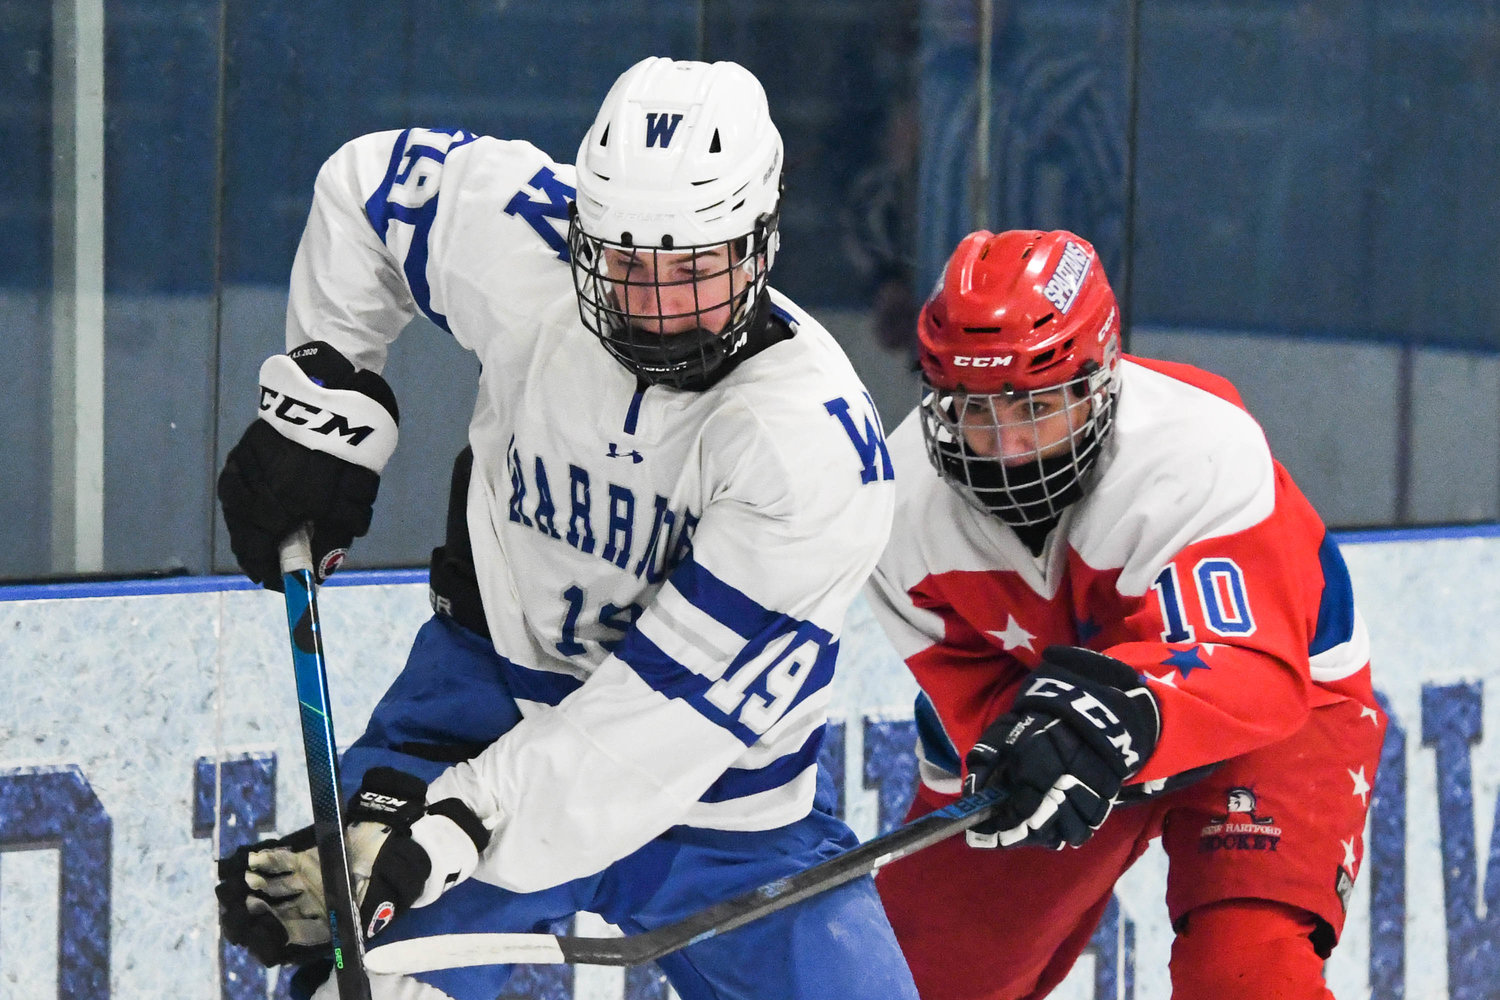 From left, Whitesboro player Kaeden Wood (19) moves the puck against New Hartford player Rowan Gall (10) during the game on Tuesday, Feb. 8.